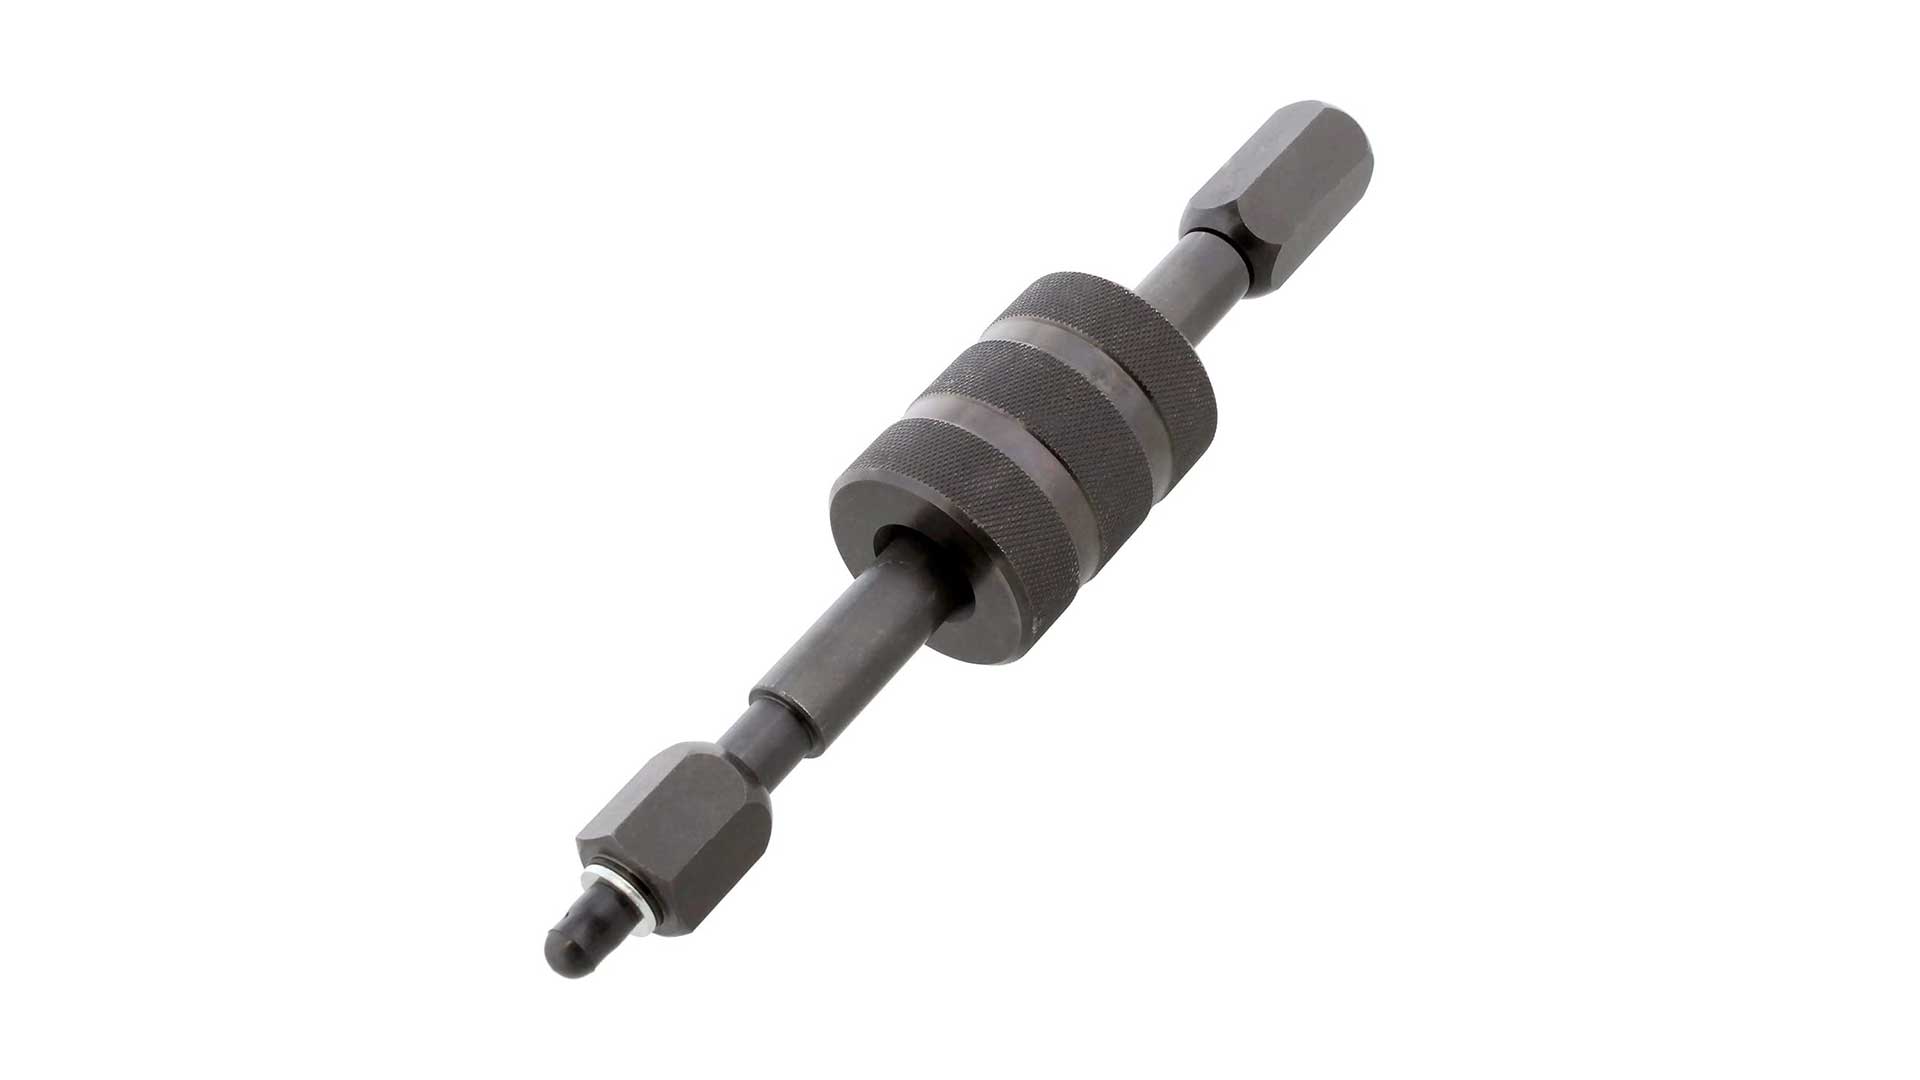 abn 3124 injector removal tool